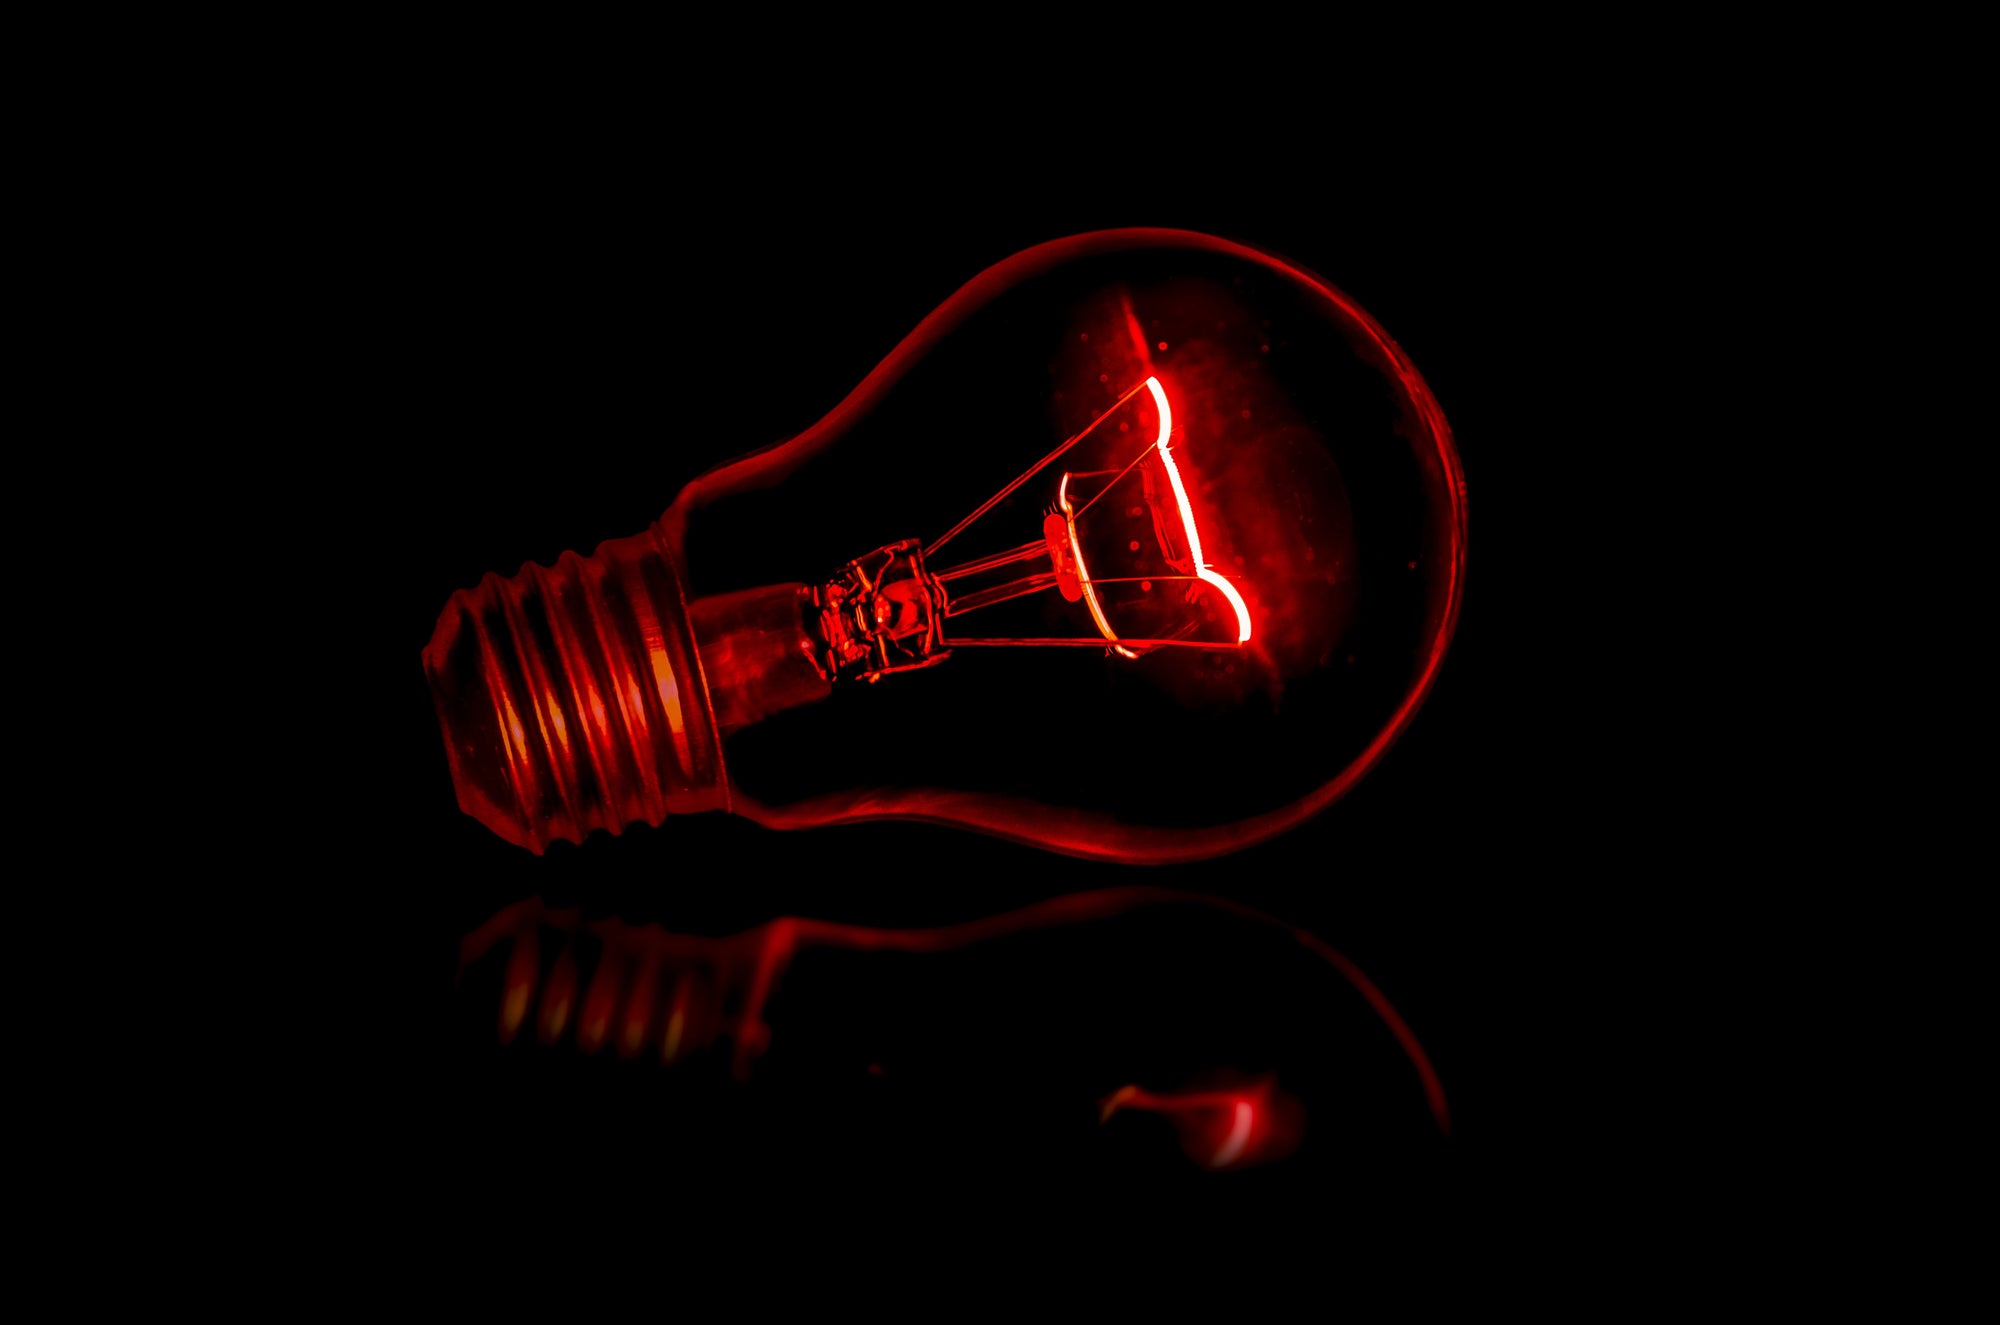 An image of a bulb emiting red light.